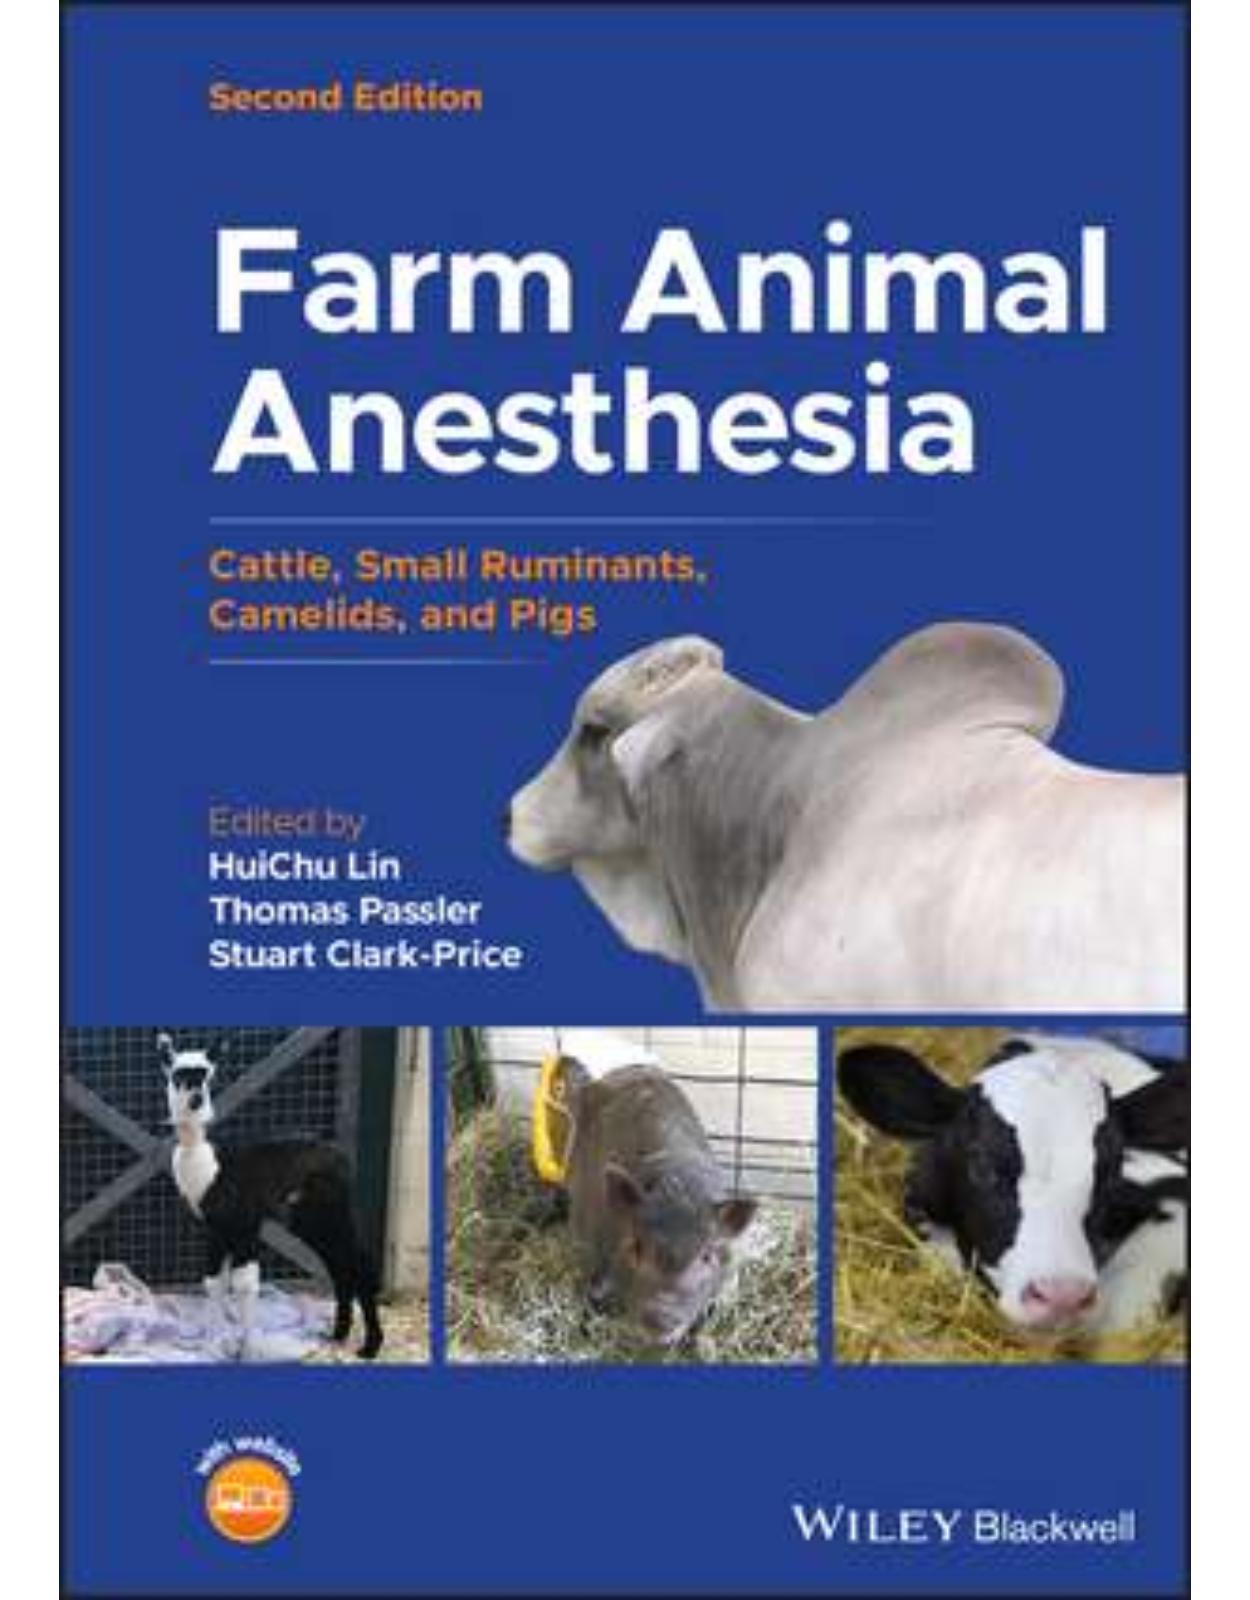 Farm Animal Anesthesia – Cattle, Small Ruminants, Camelids, and Pigs